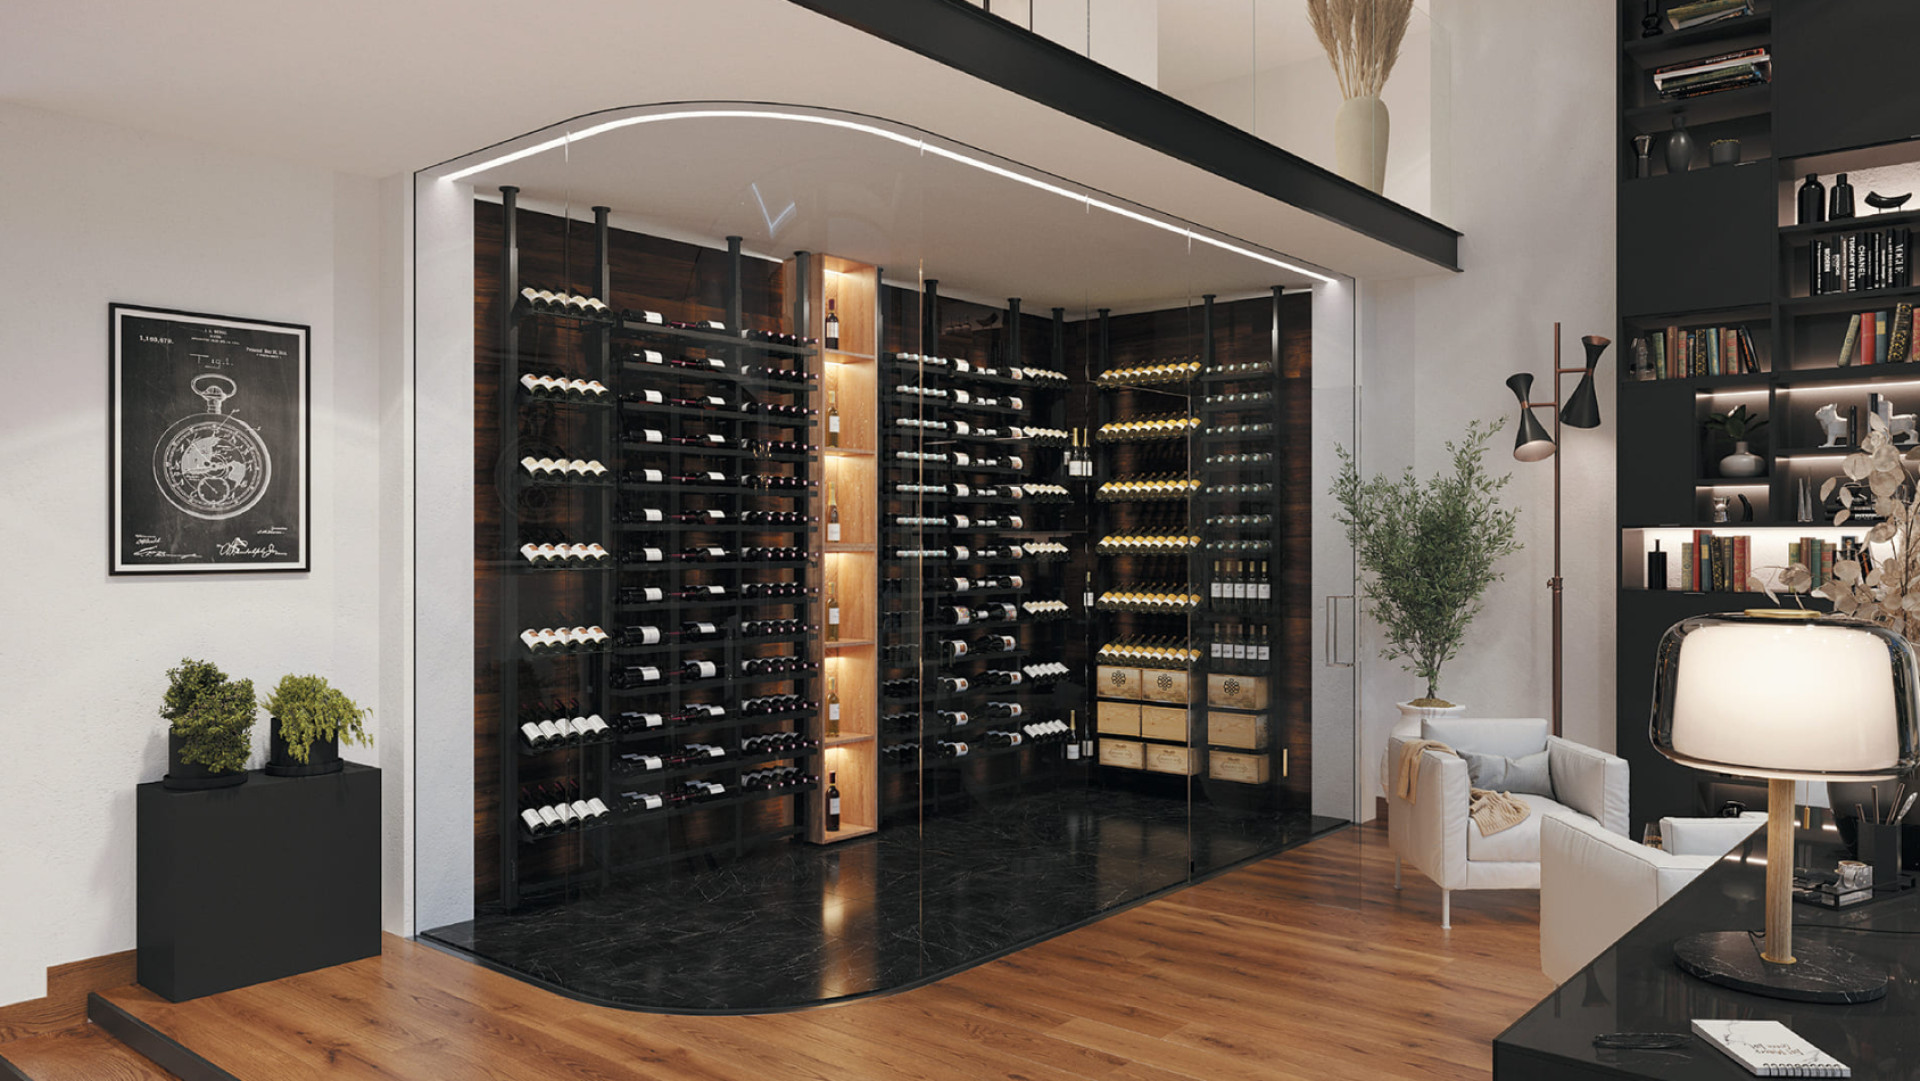 Luxurious air-conditioned wine cellar arranged in a living room to showcase your bottles. High quality wine storage in black metal for an industrial style.